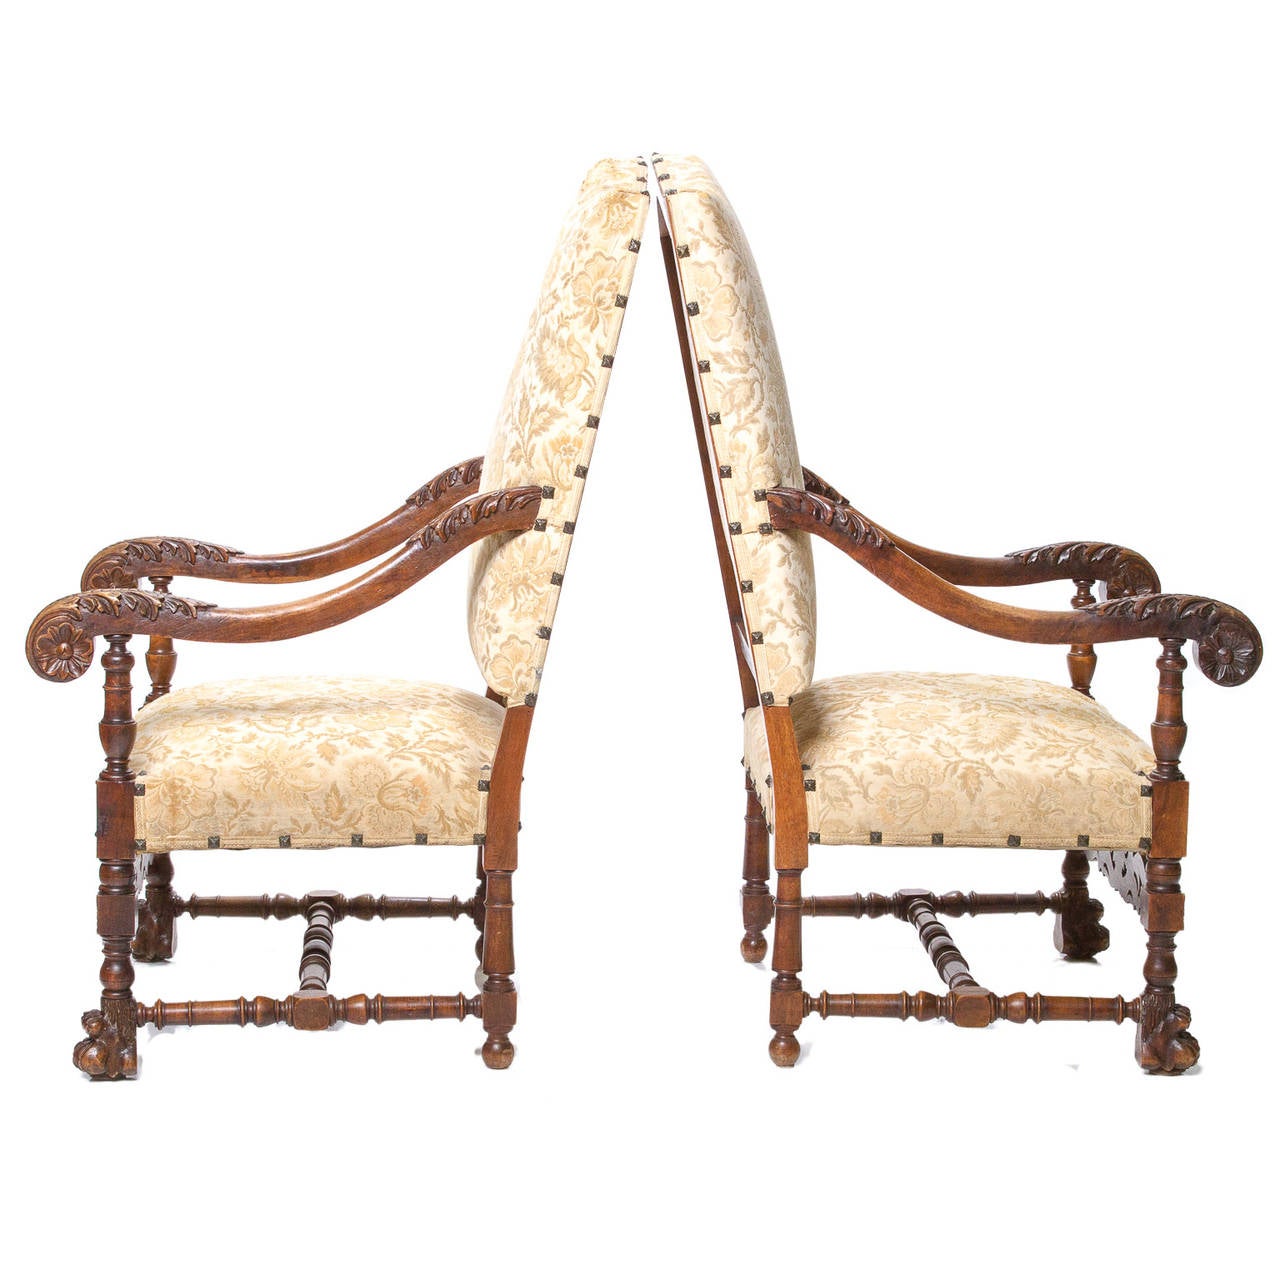 A very nice 19th century pair of armchairs from France. These are made of beechwood and in the Louis XIV style. The chairs are well carved and dressed with the vintage fabric and nailheads. Circa 1870-1880.

 

27″ wide

 

27.5″ deep

